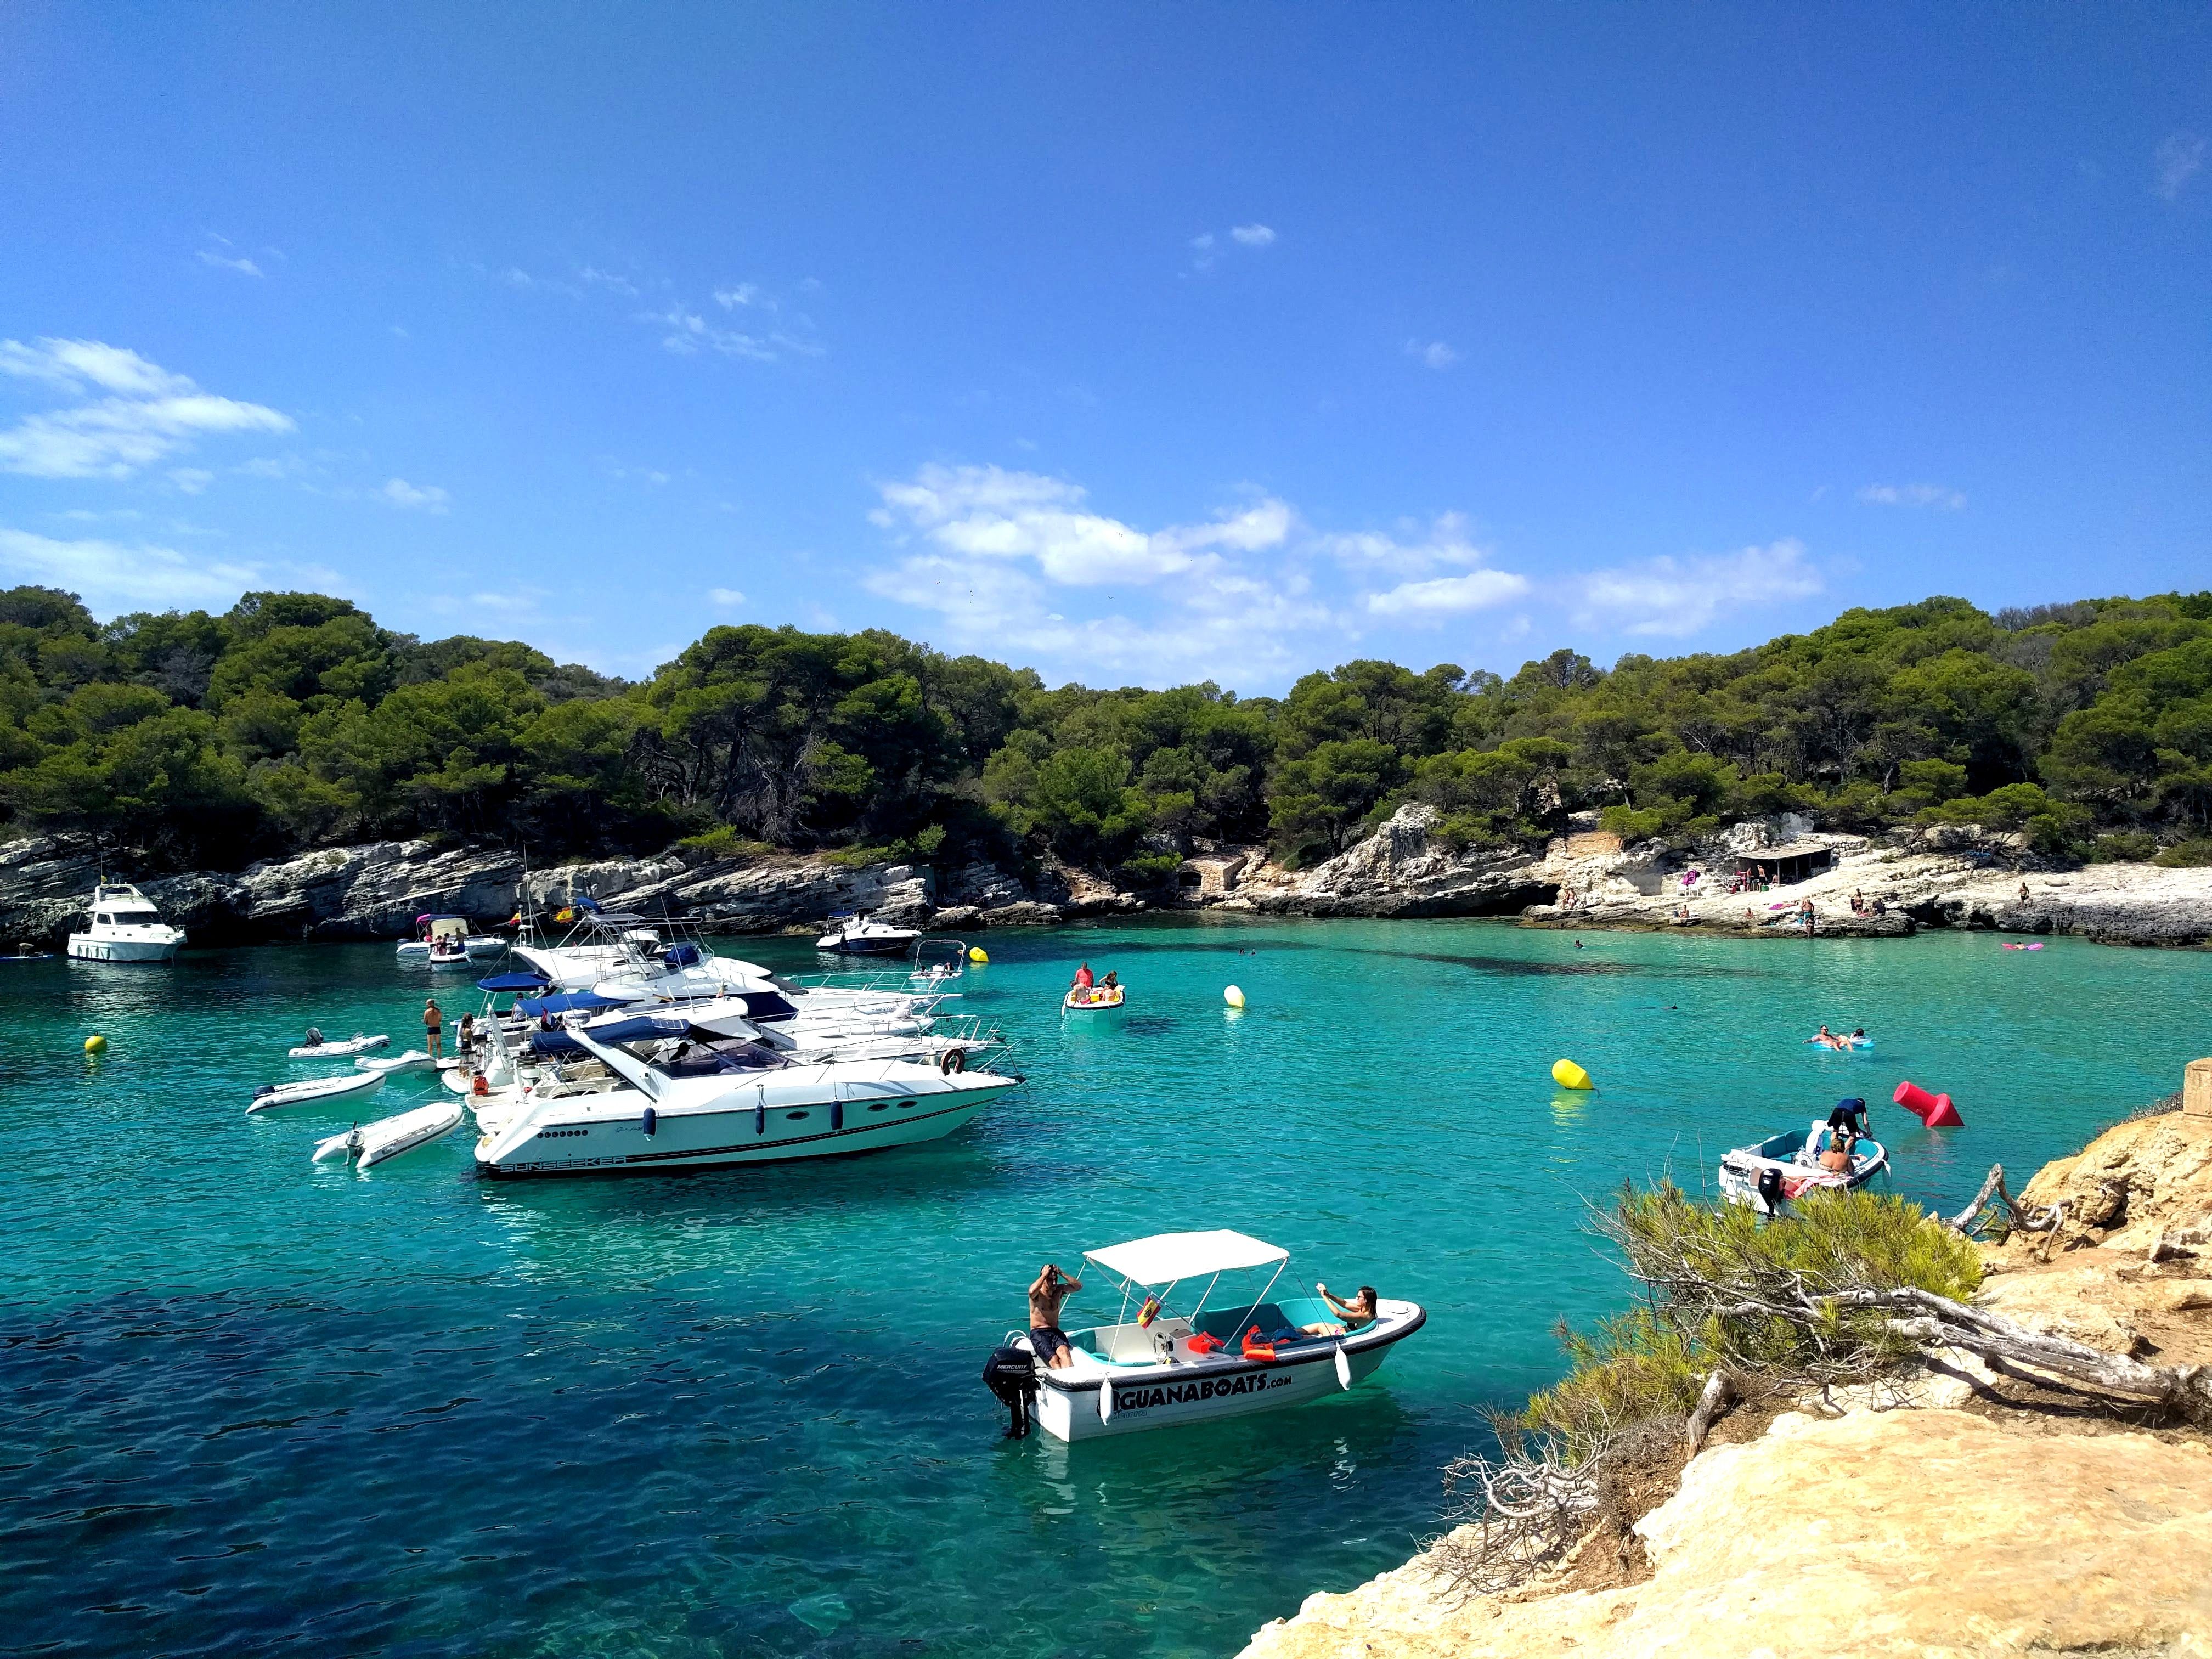 Caption: A photo of several boats floating on the turquoise waters near a rocky beach in Menorca, Spain. (Local Guide @MoniDi)